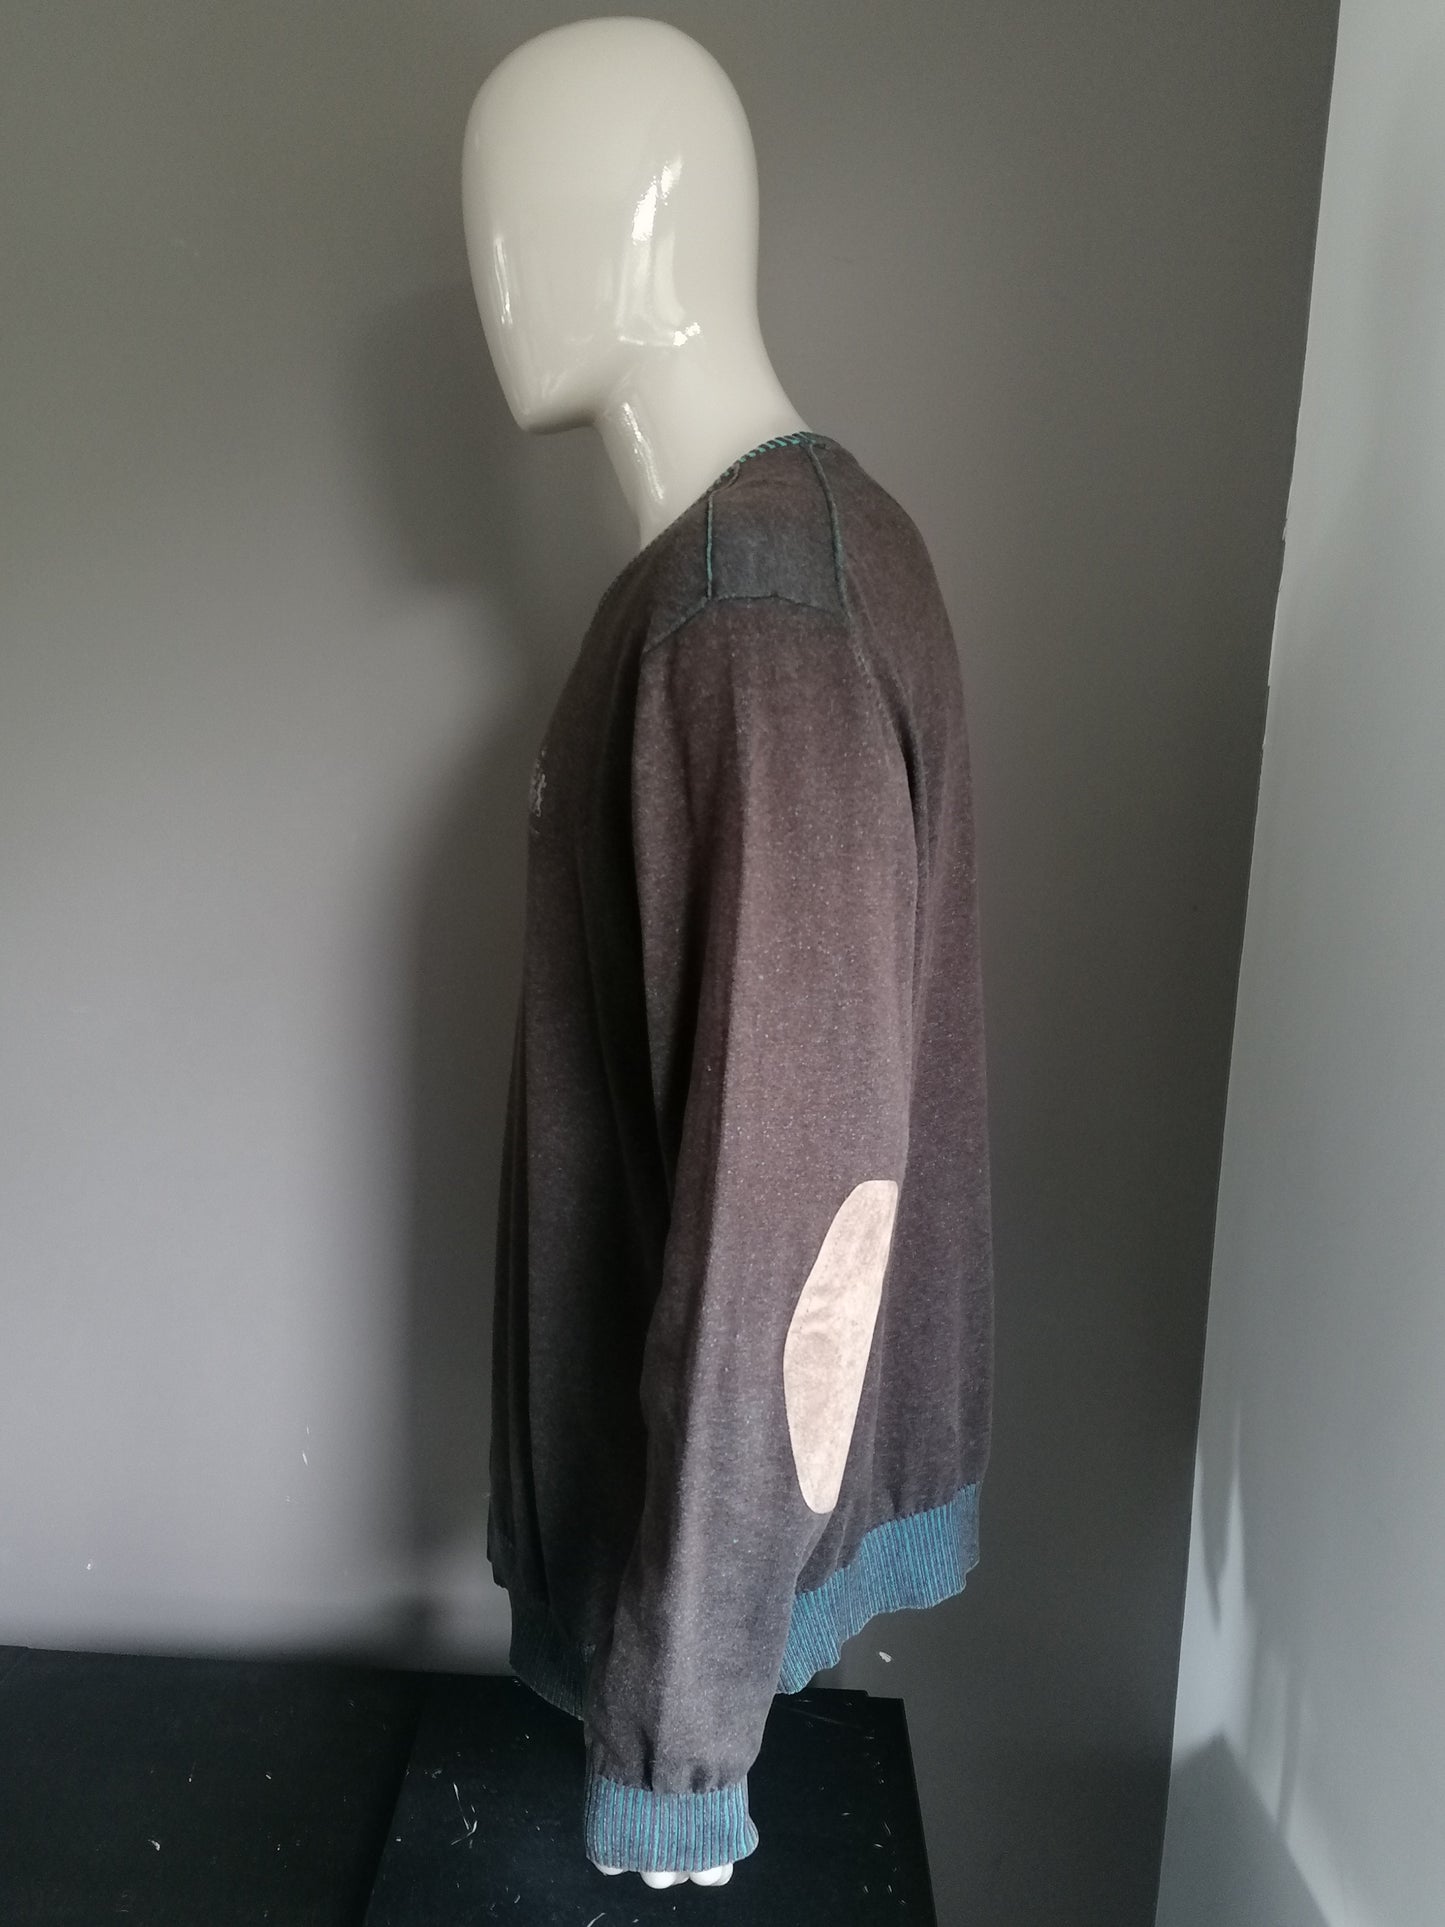 State of art sweater. V-neck. Blue brown mixed. Size XXXL / 3XL.